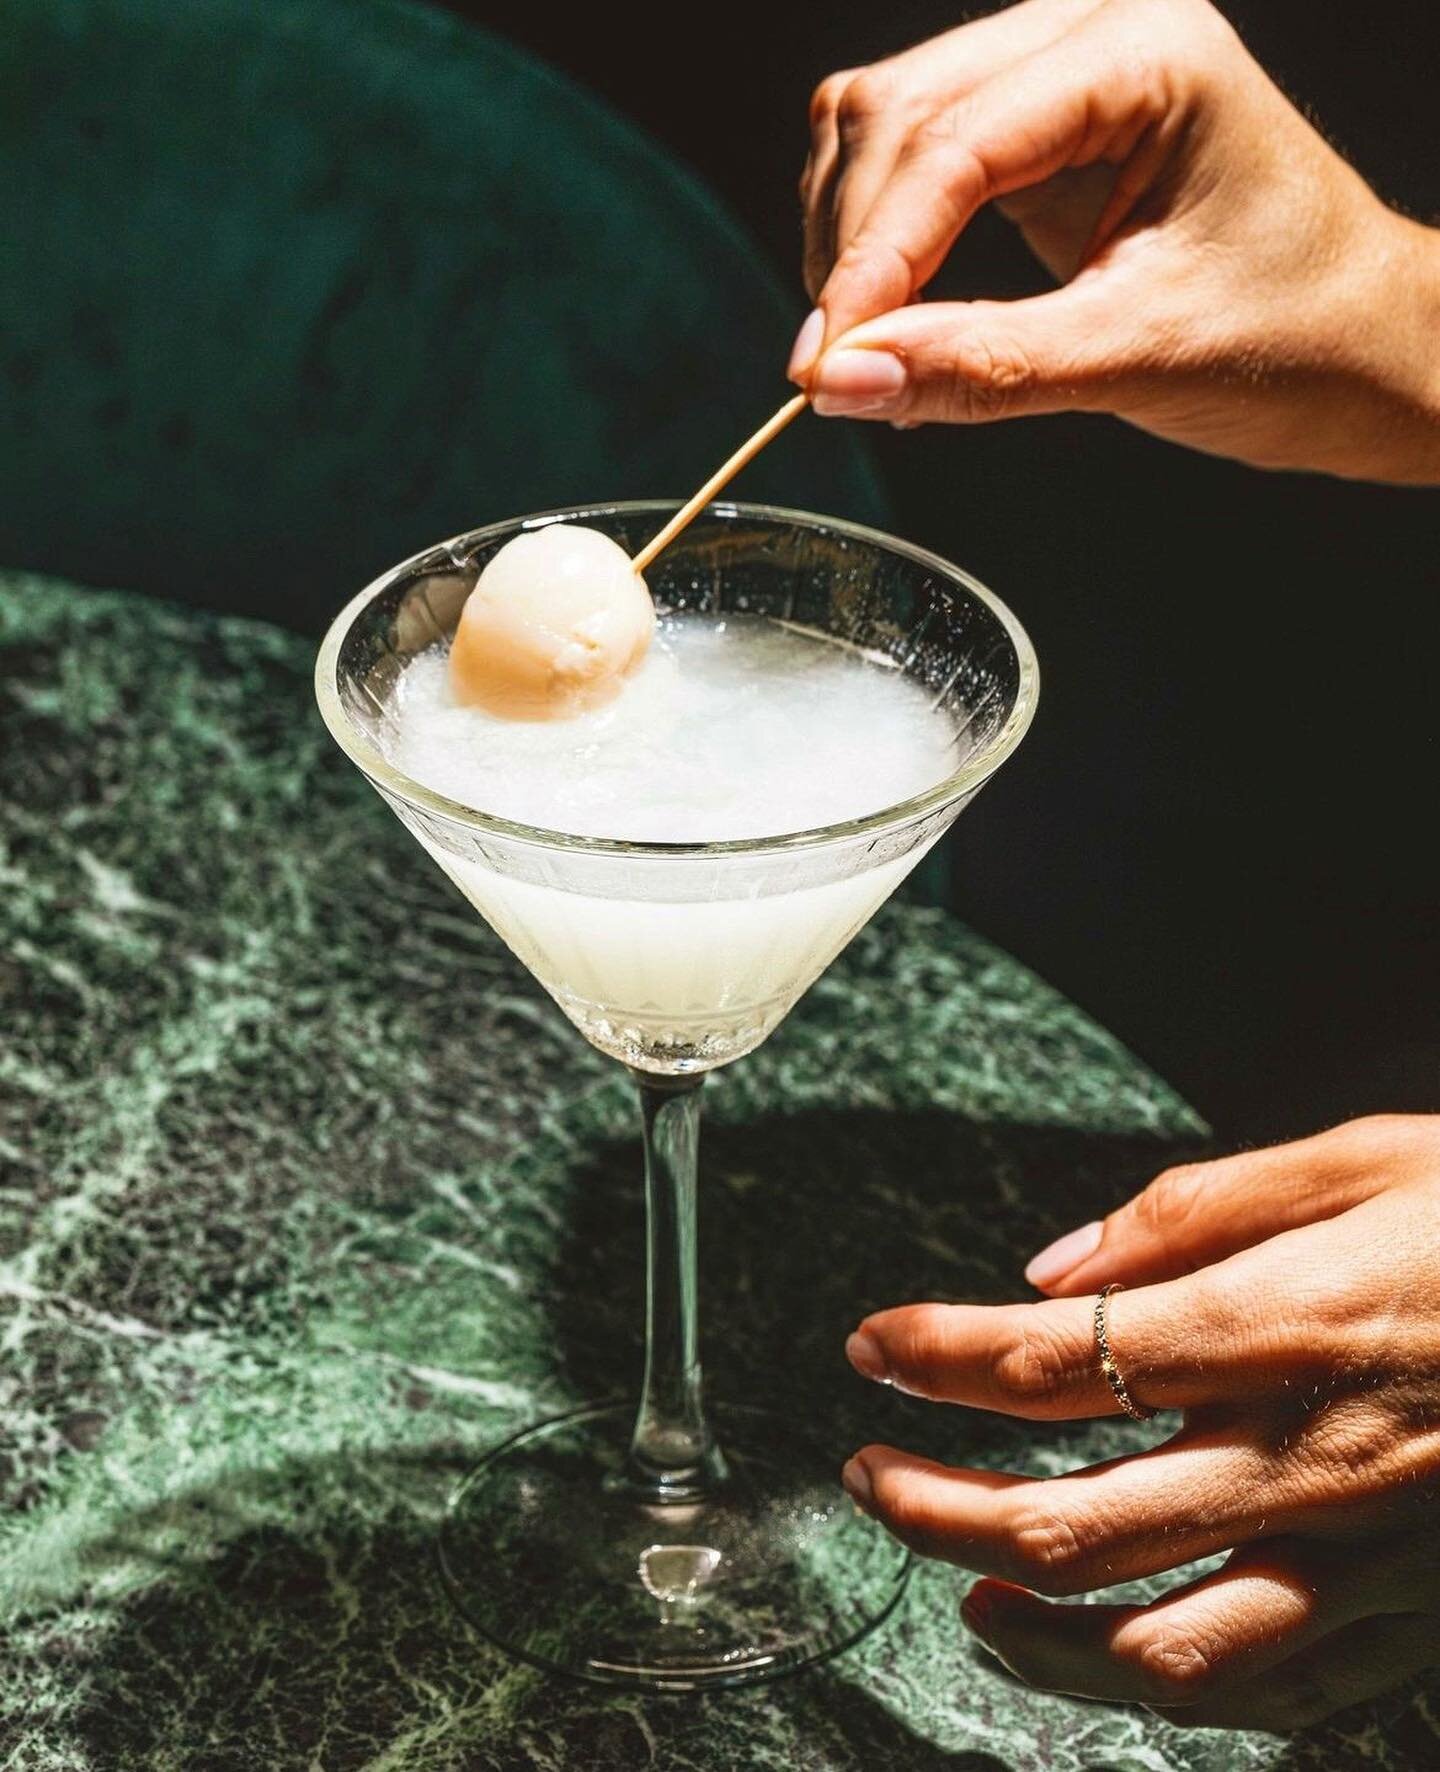 Looking to put a sweet spin on the classic Martini? 🍸 Try the lychee martini also known as a &lsquo;lycheetini&rsquo;. This slightly sweet yet sophisticated cocktail featuring our Australian Baijiu was created by our friends at @nihaobar in Sydney. 